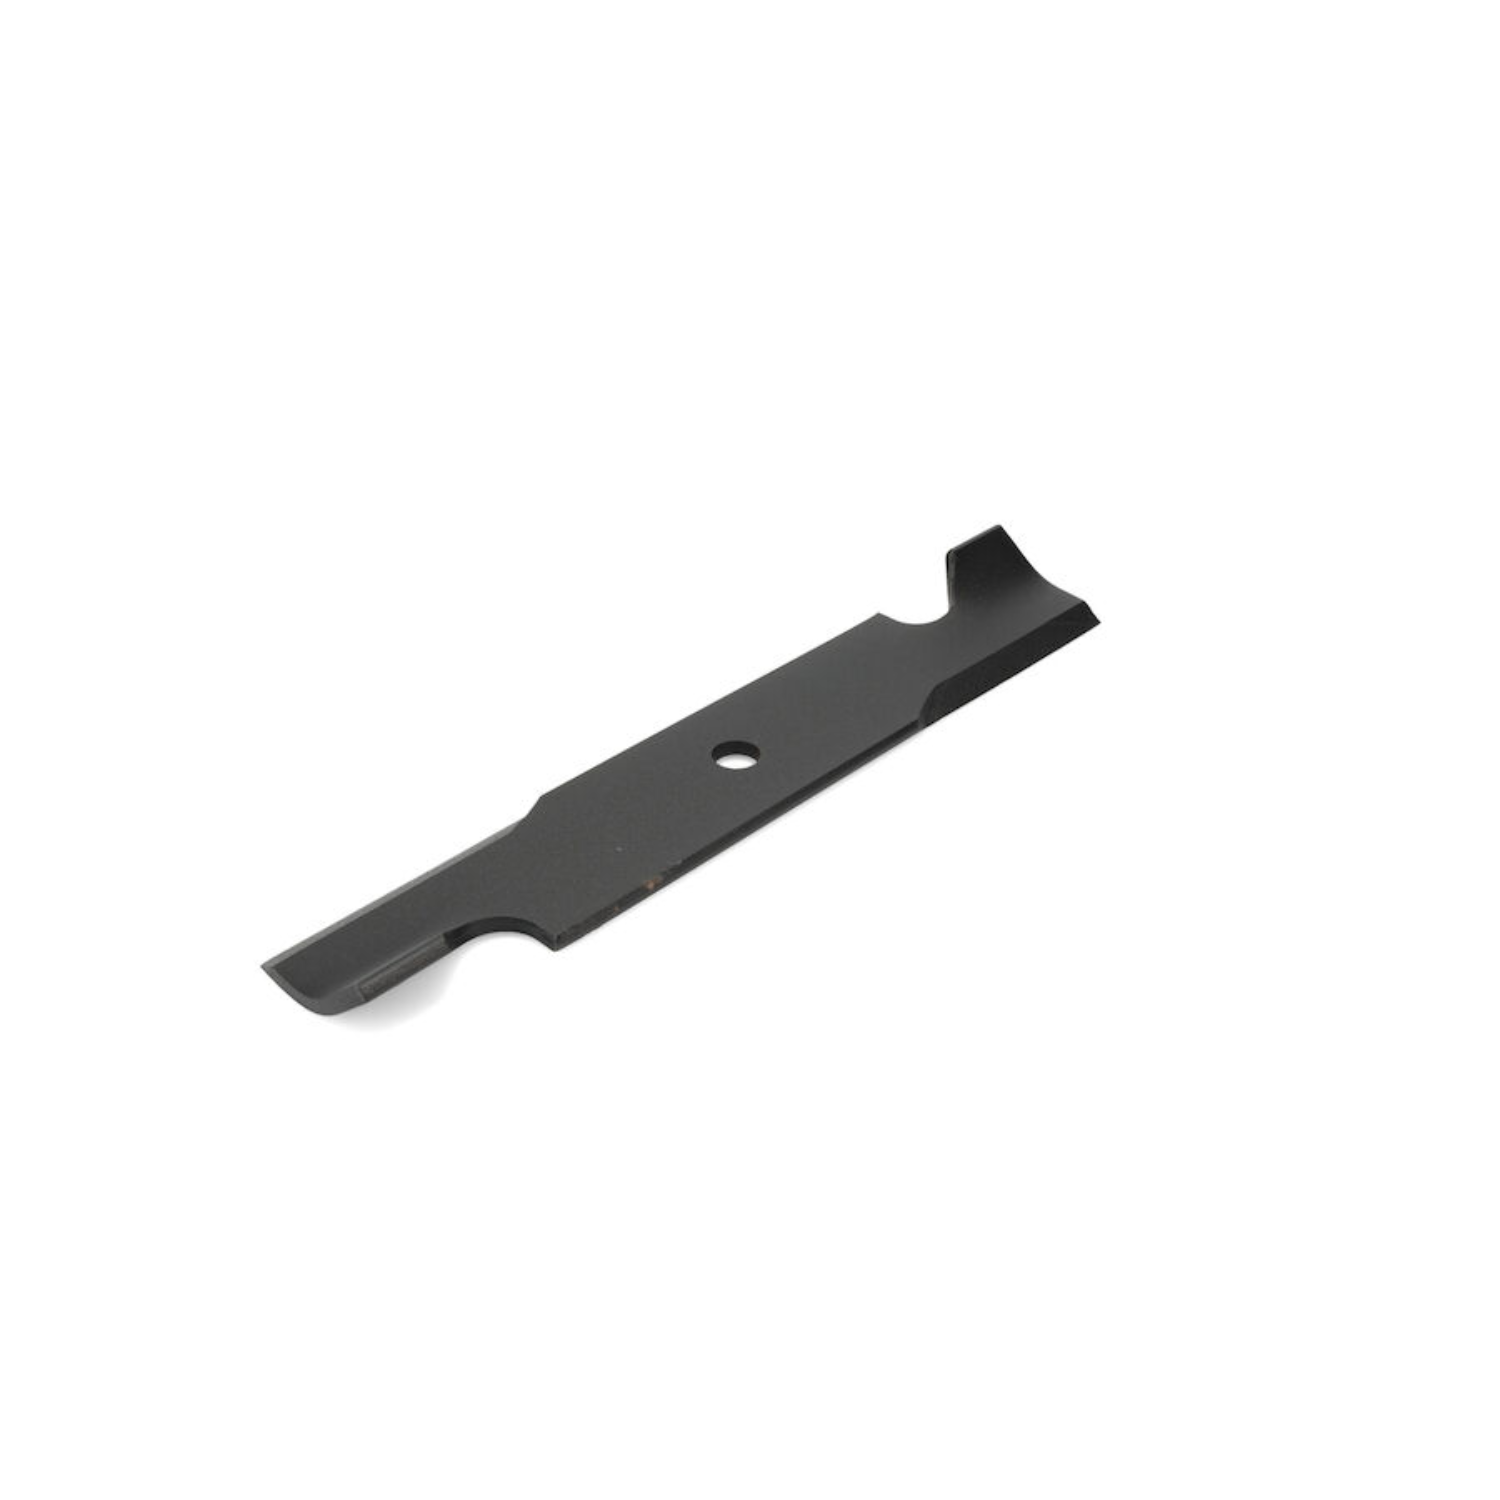 Toro 14 Inch High Sail Blade for Z Master / GrandStand Mower 108-4081-03